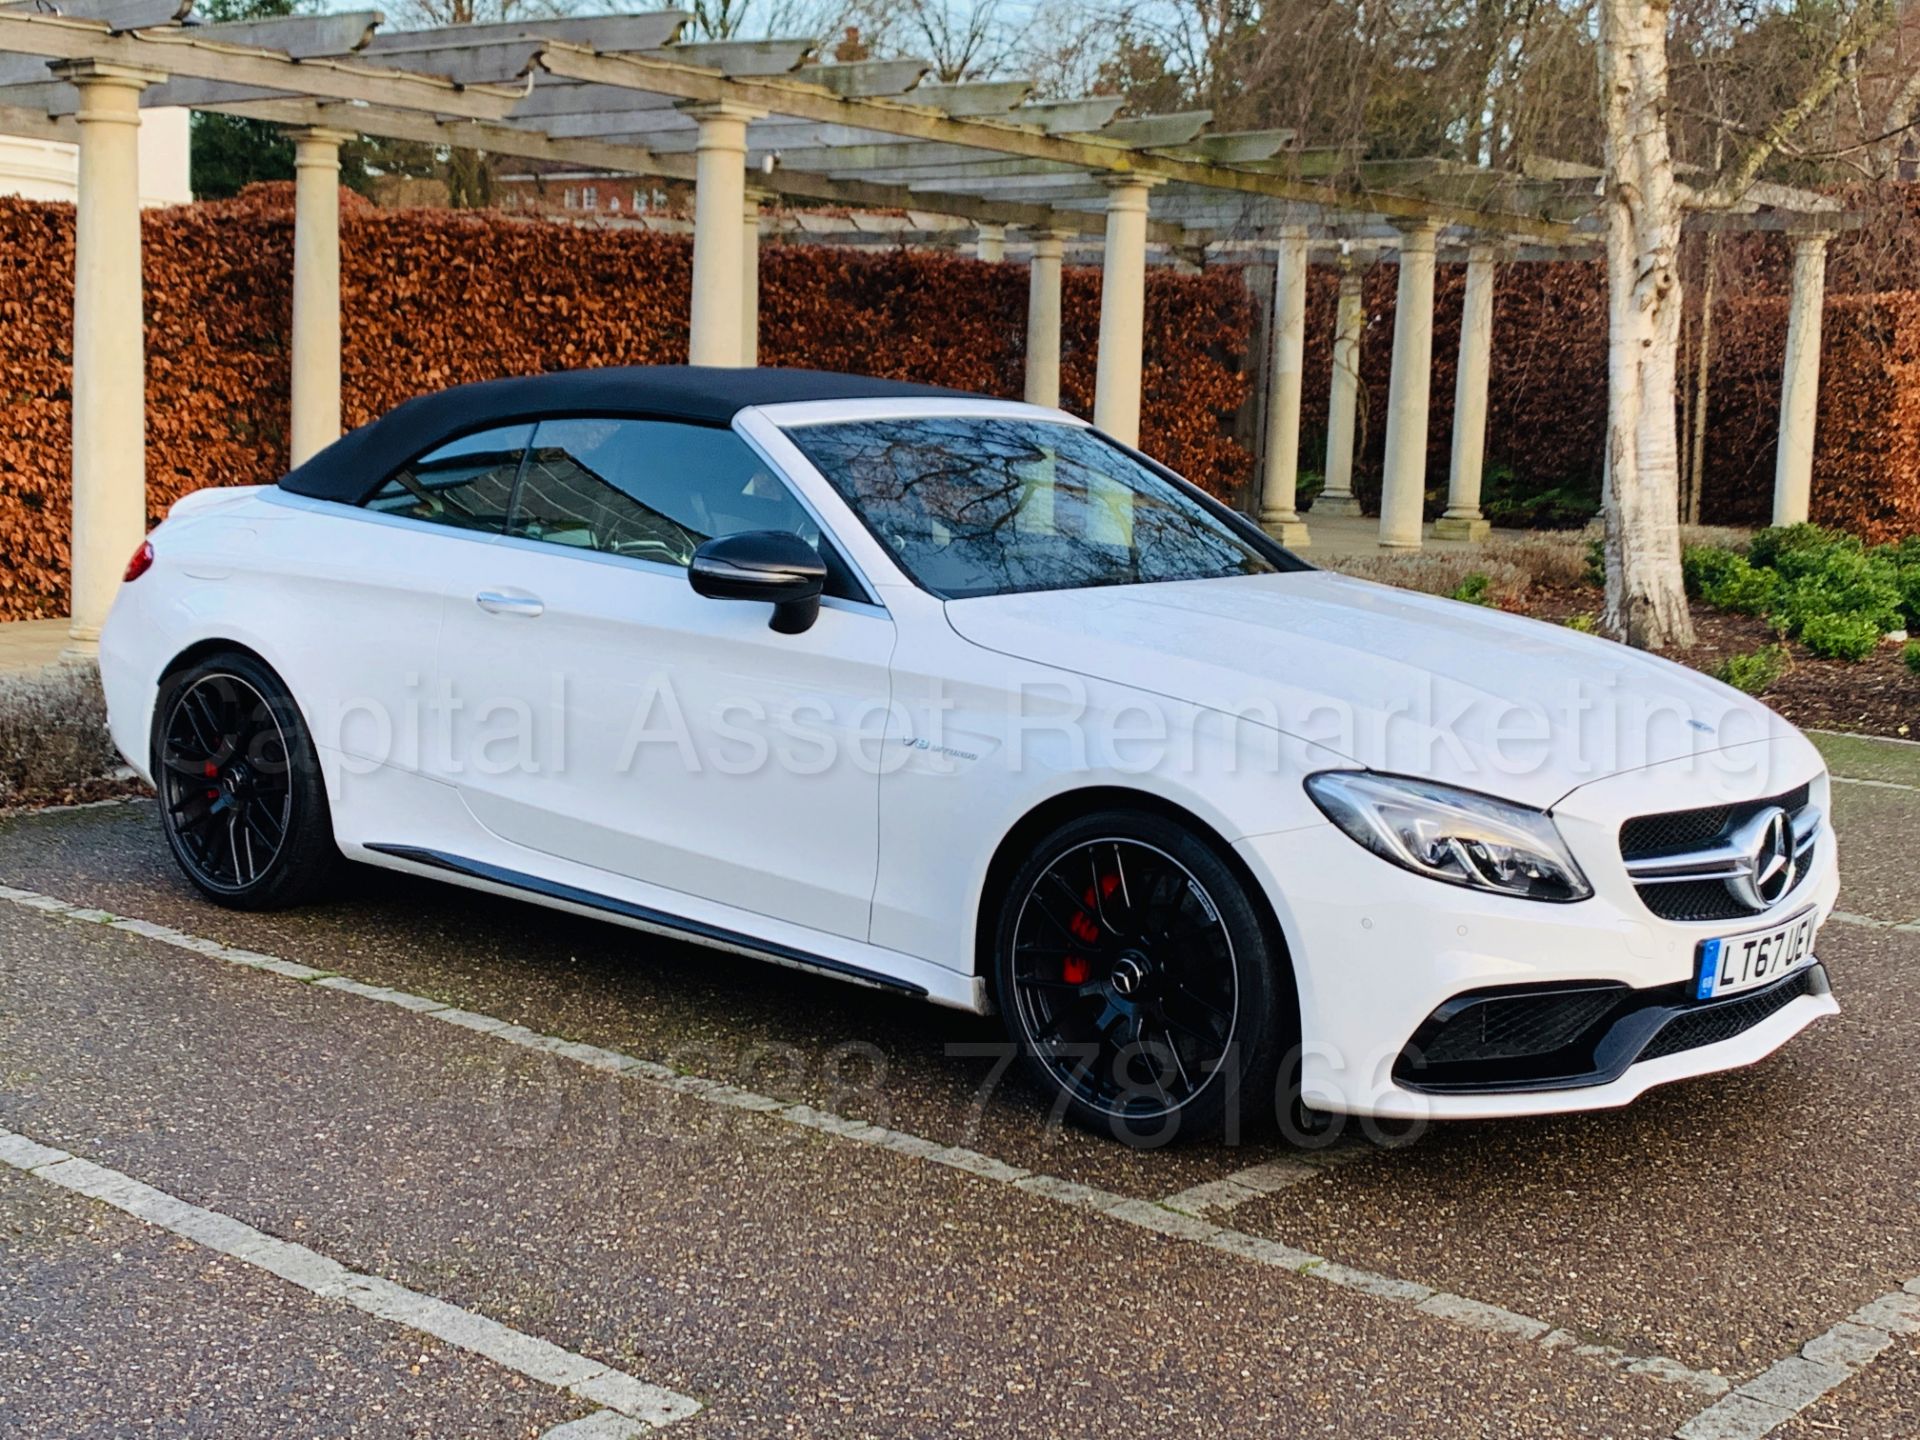 (On Sale) MERCEDES-BENZ AMG C63-S *CABRIOLET* (67 REG) '4.0 BI-TURBO -510 BHP - AUTO' *FULLY LOADED* - Image 2 of 79